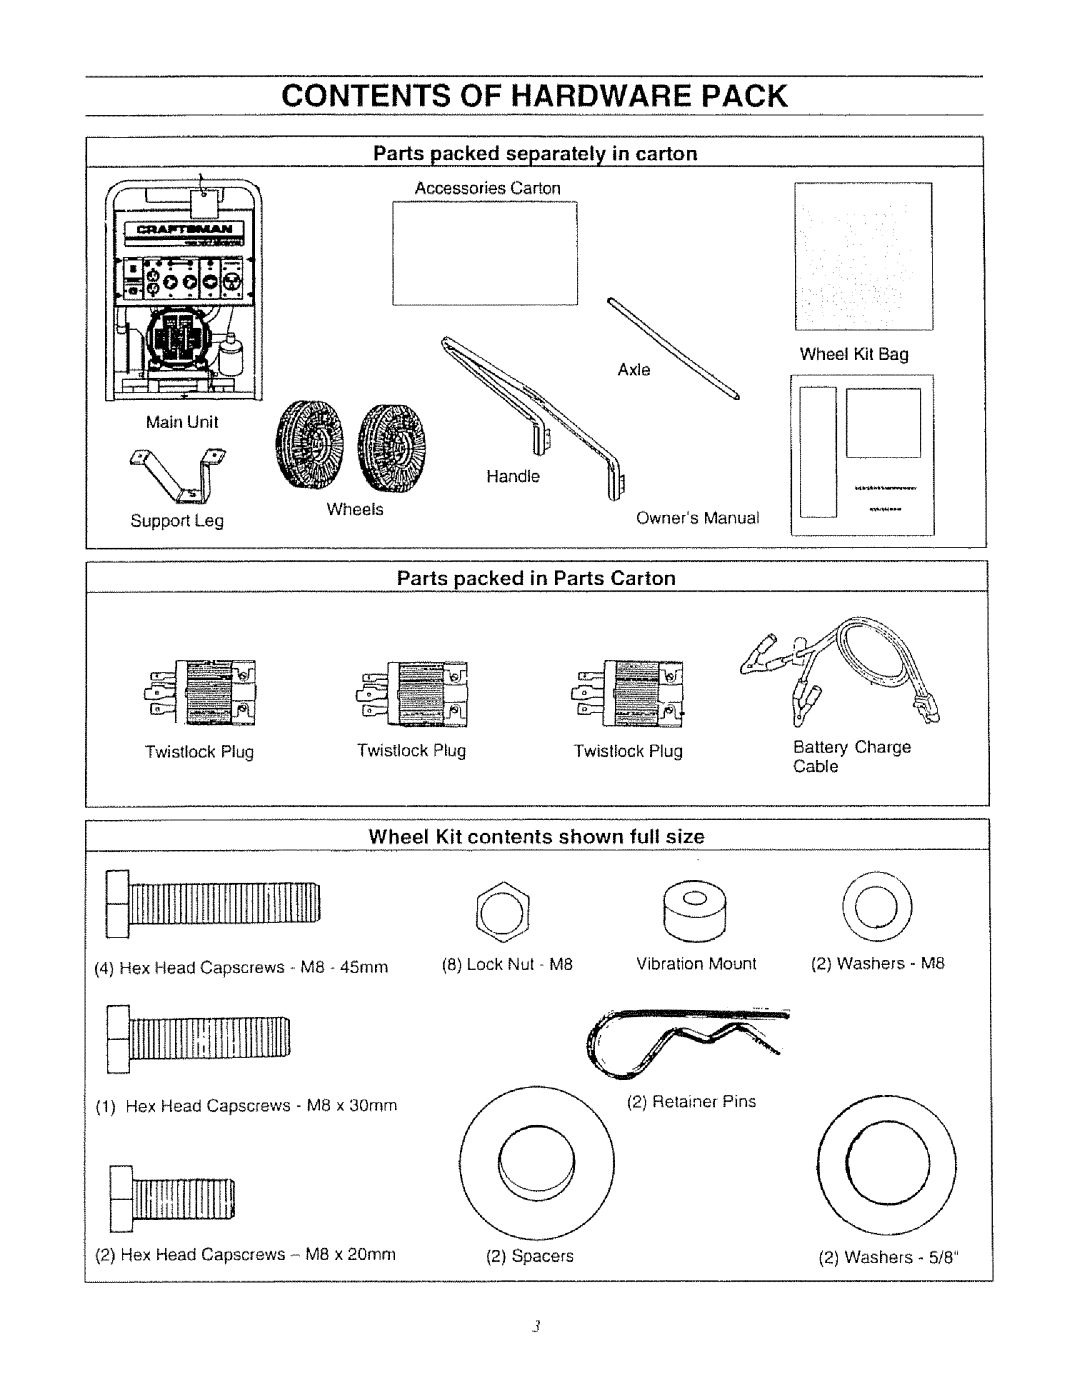 Craftsman 580.327071 owner manual IIllmi, Contents of Hardware Pack 